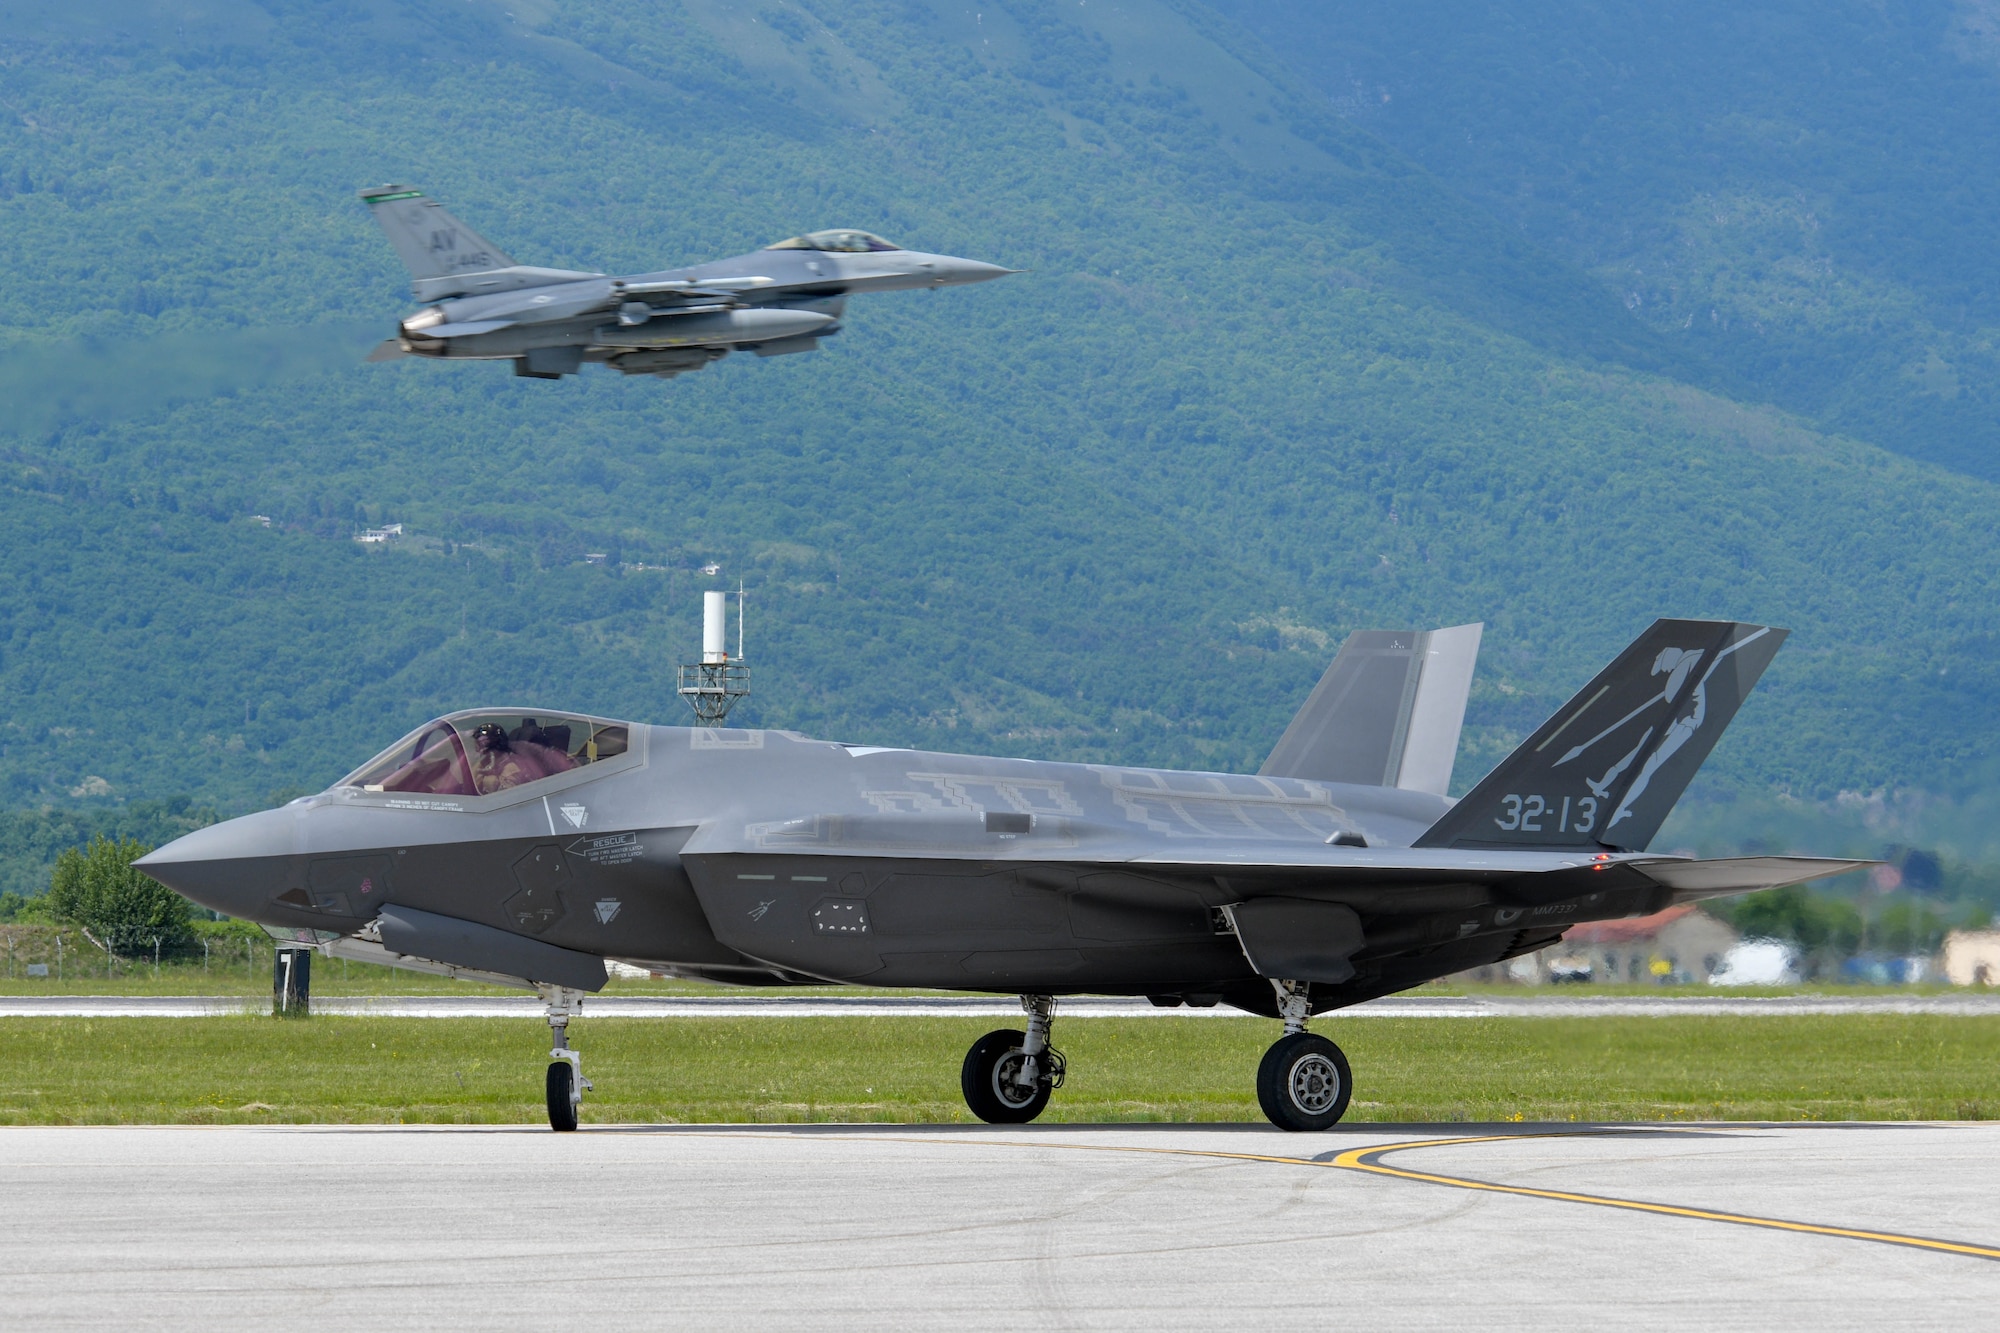 For the first time ever, two F-35s landed at Aviano in support of AK21 May 20, 2021.